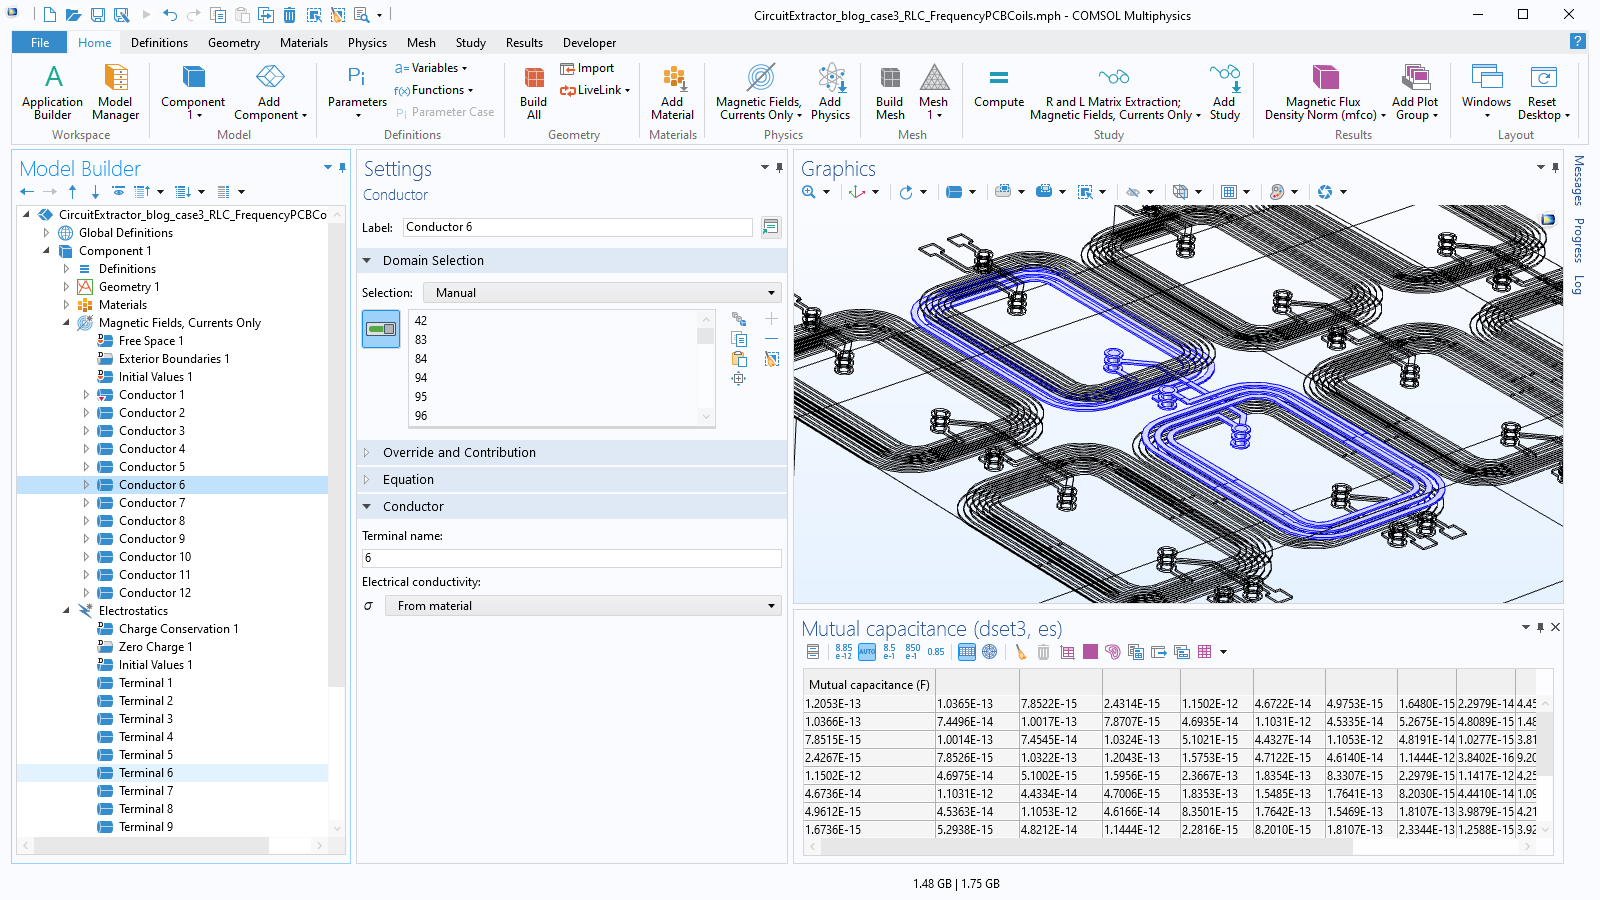 The COMSOL Multiphysics UI showing the Model Builder with the Conductor 6 feature selected; the corresponding Settings window, with the Domain Selection and Conductor sections expanded; and a model of 12 PCB coils in the Graphics window.